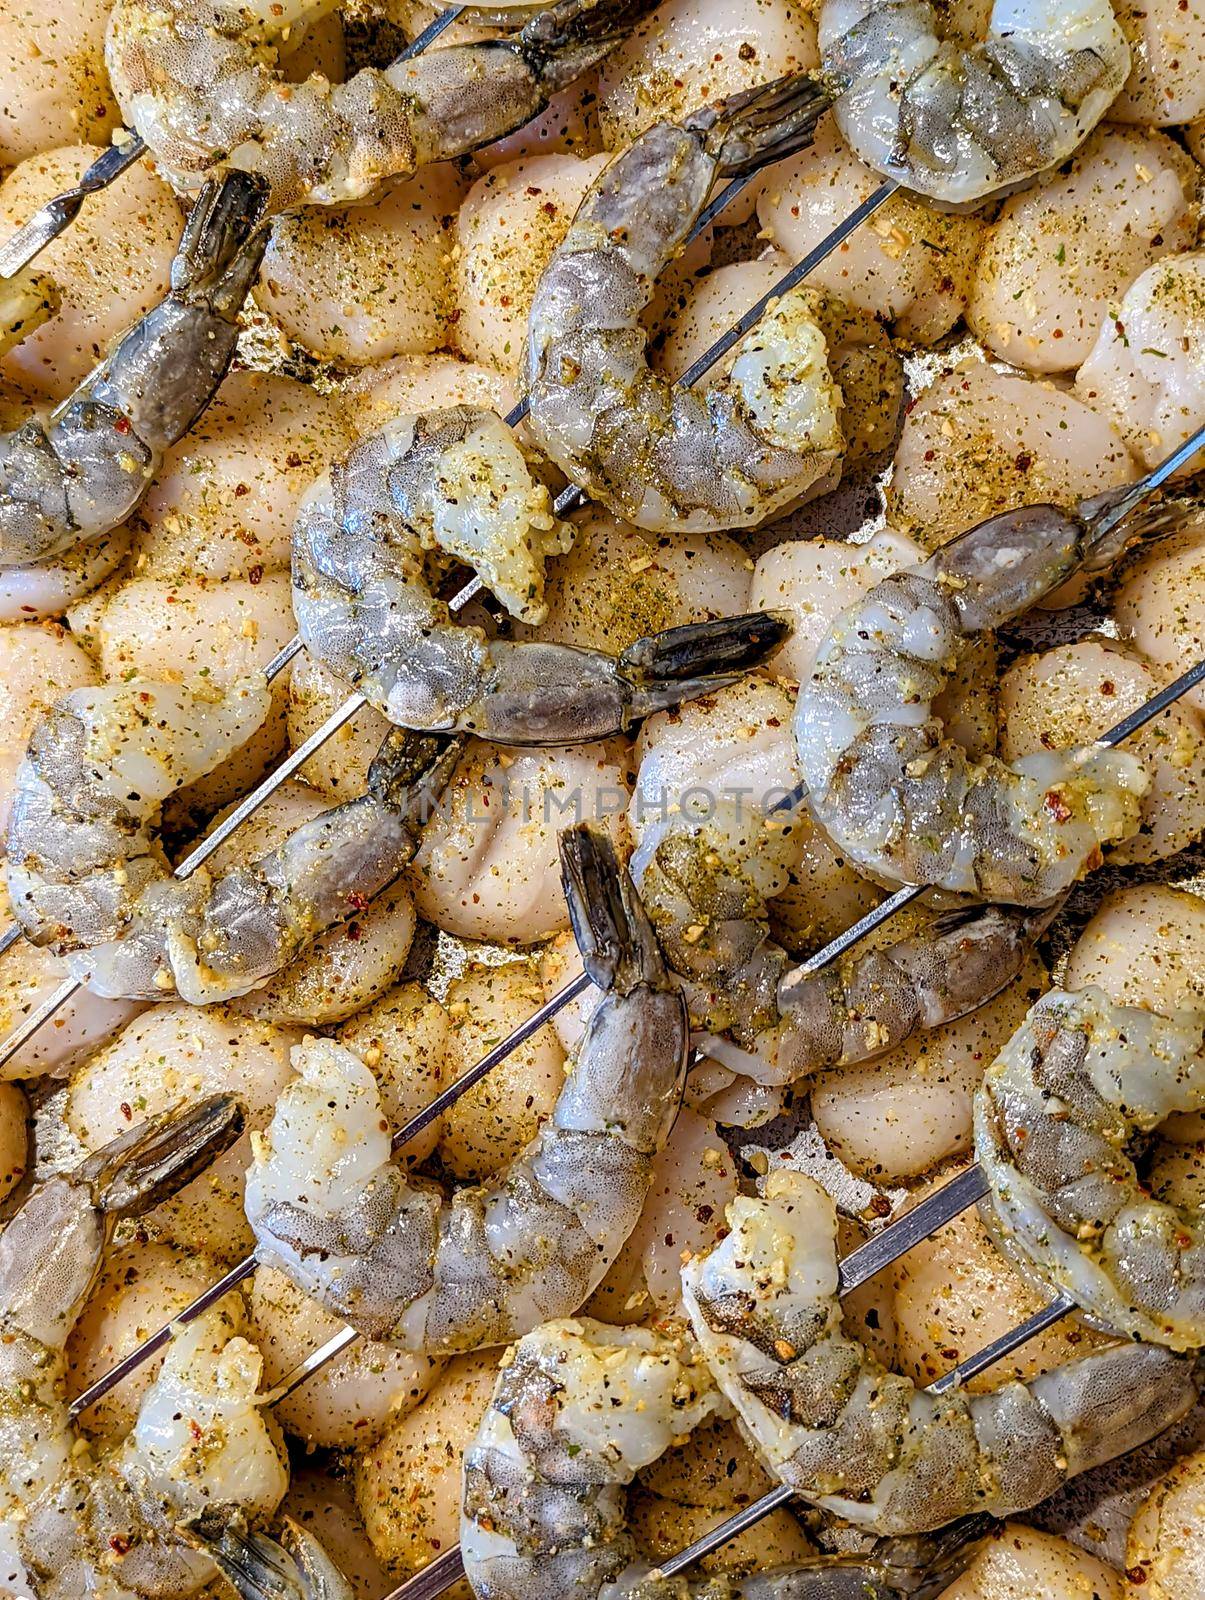 raw seasoned shrimp and scallops ready to grill